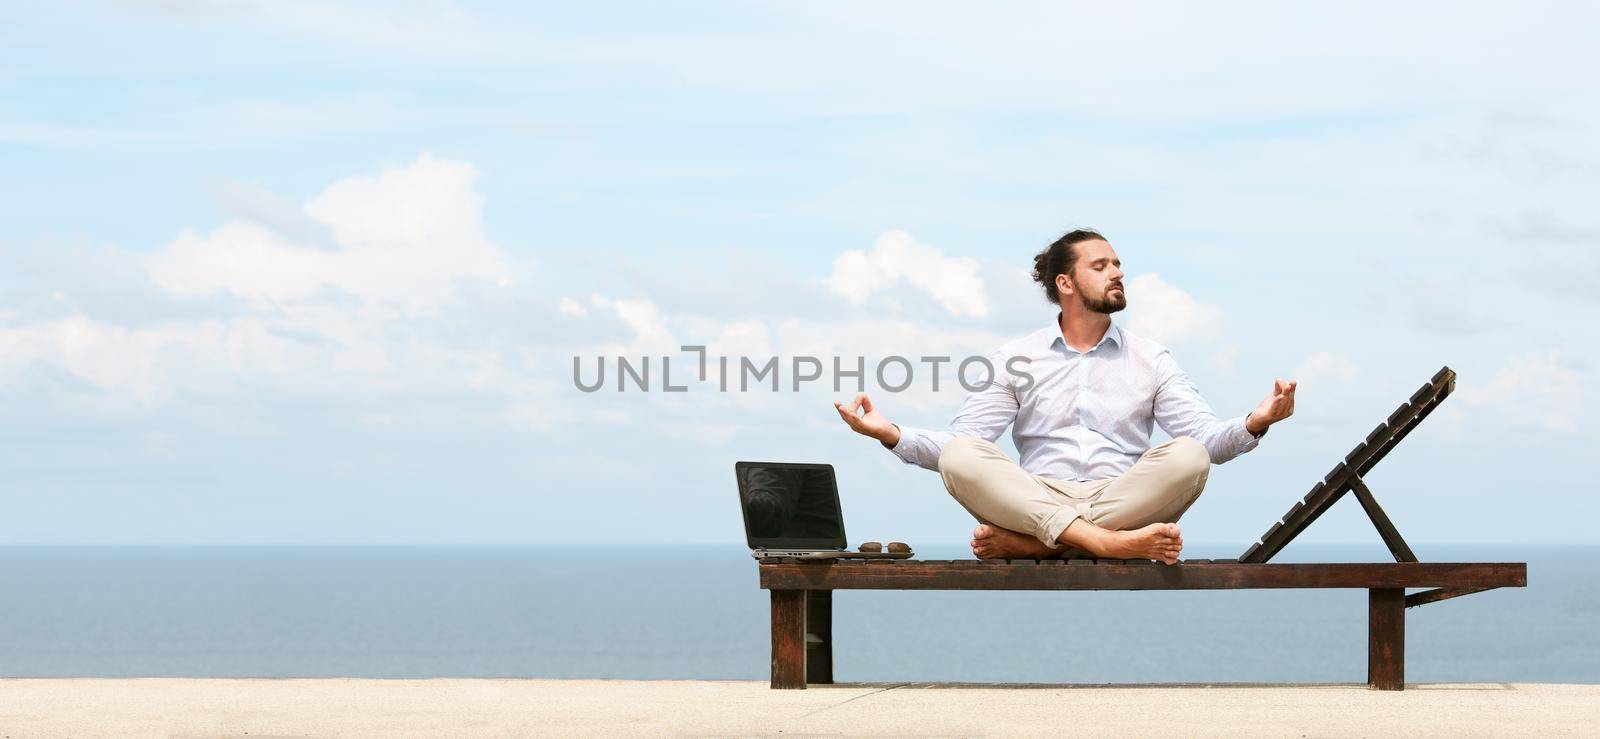 Businessman wearing a suit doing Yoga on the beach by Jyliana